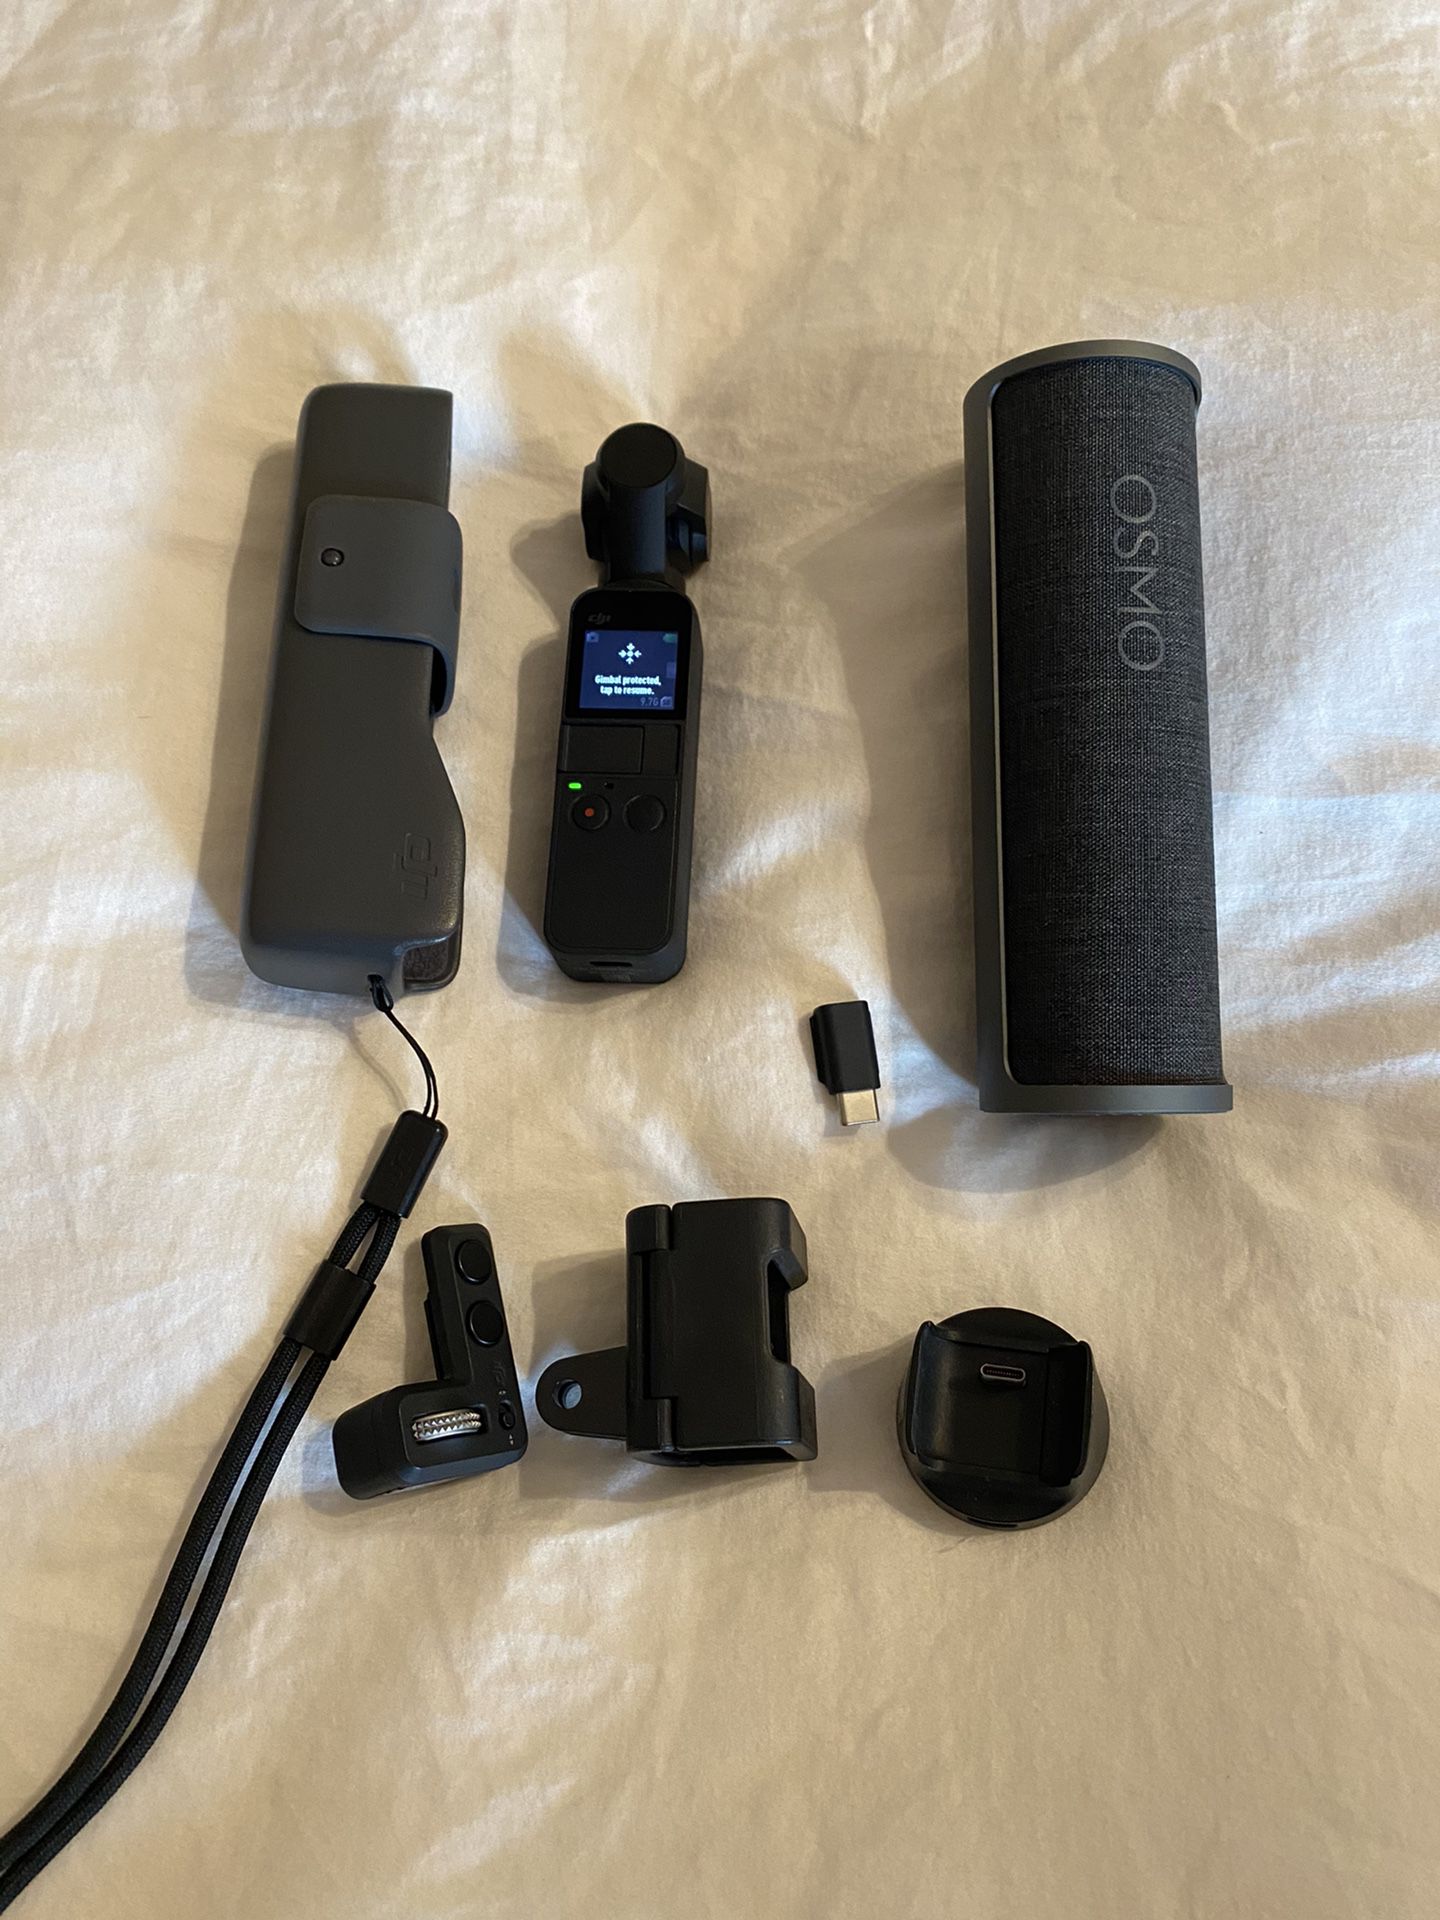 DJI OSMO POCKET with Accessories